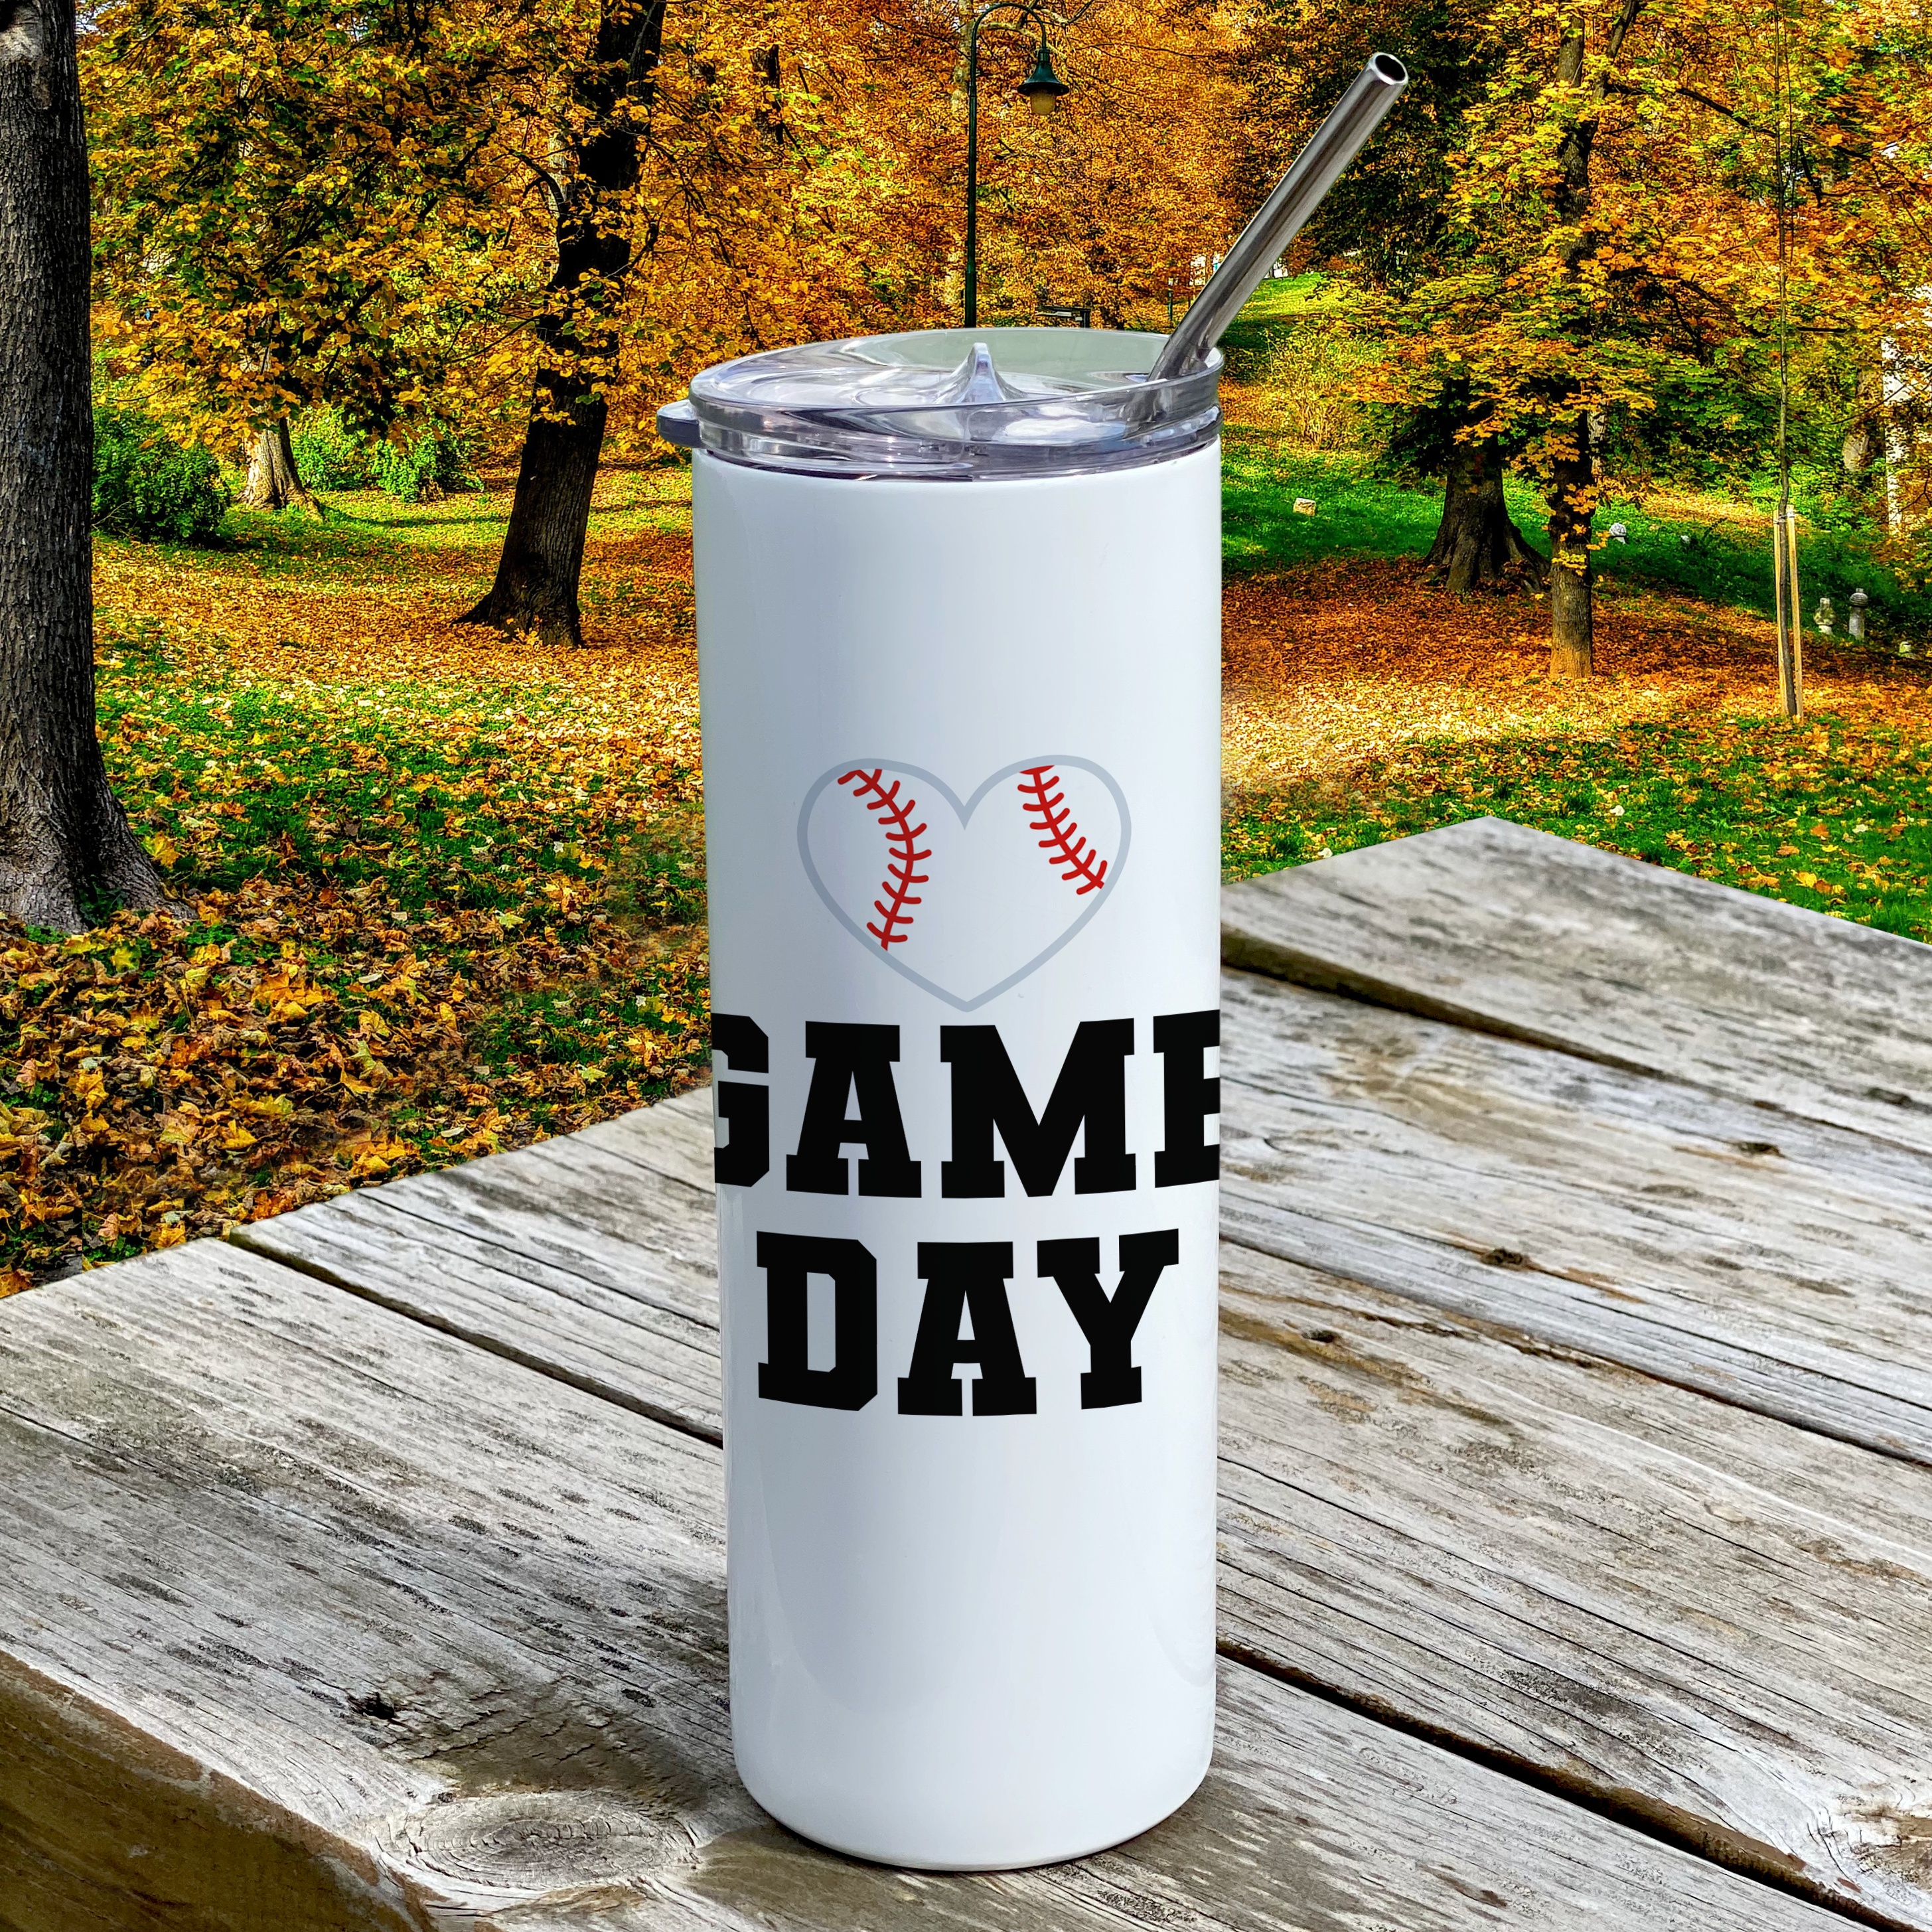 Sports Collection (Game Day – Baseball - Personalized) 20 Oz Stainless Steel Travel Tumbler with Straw (White)